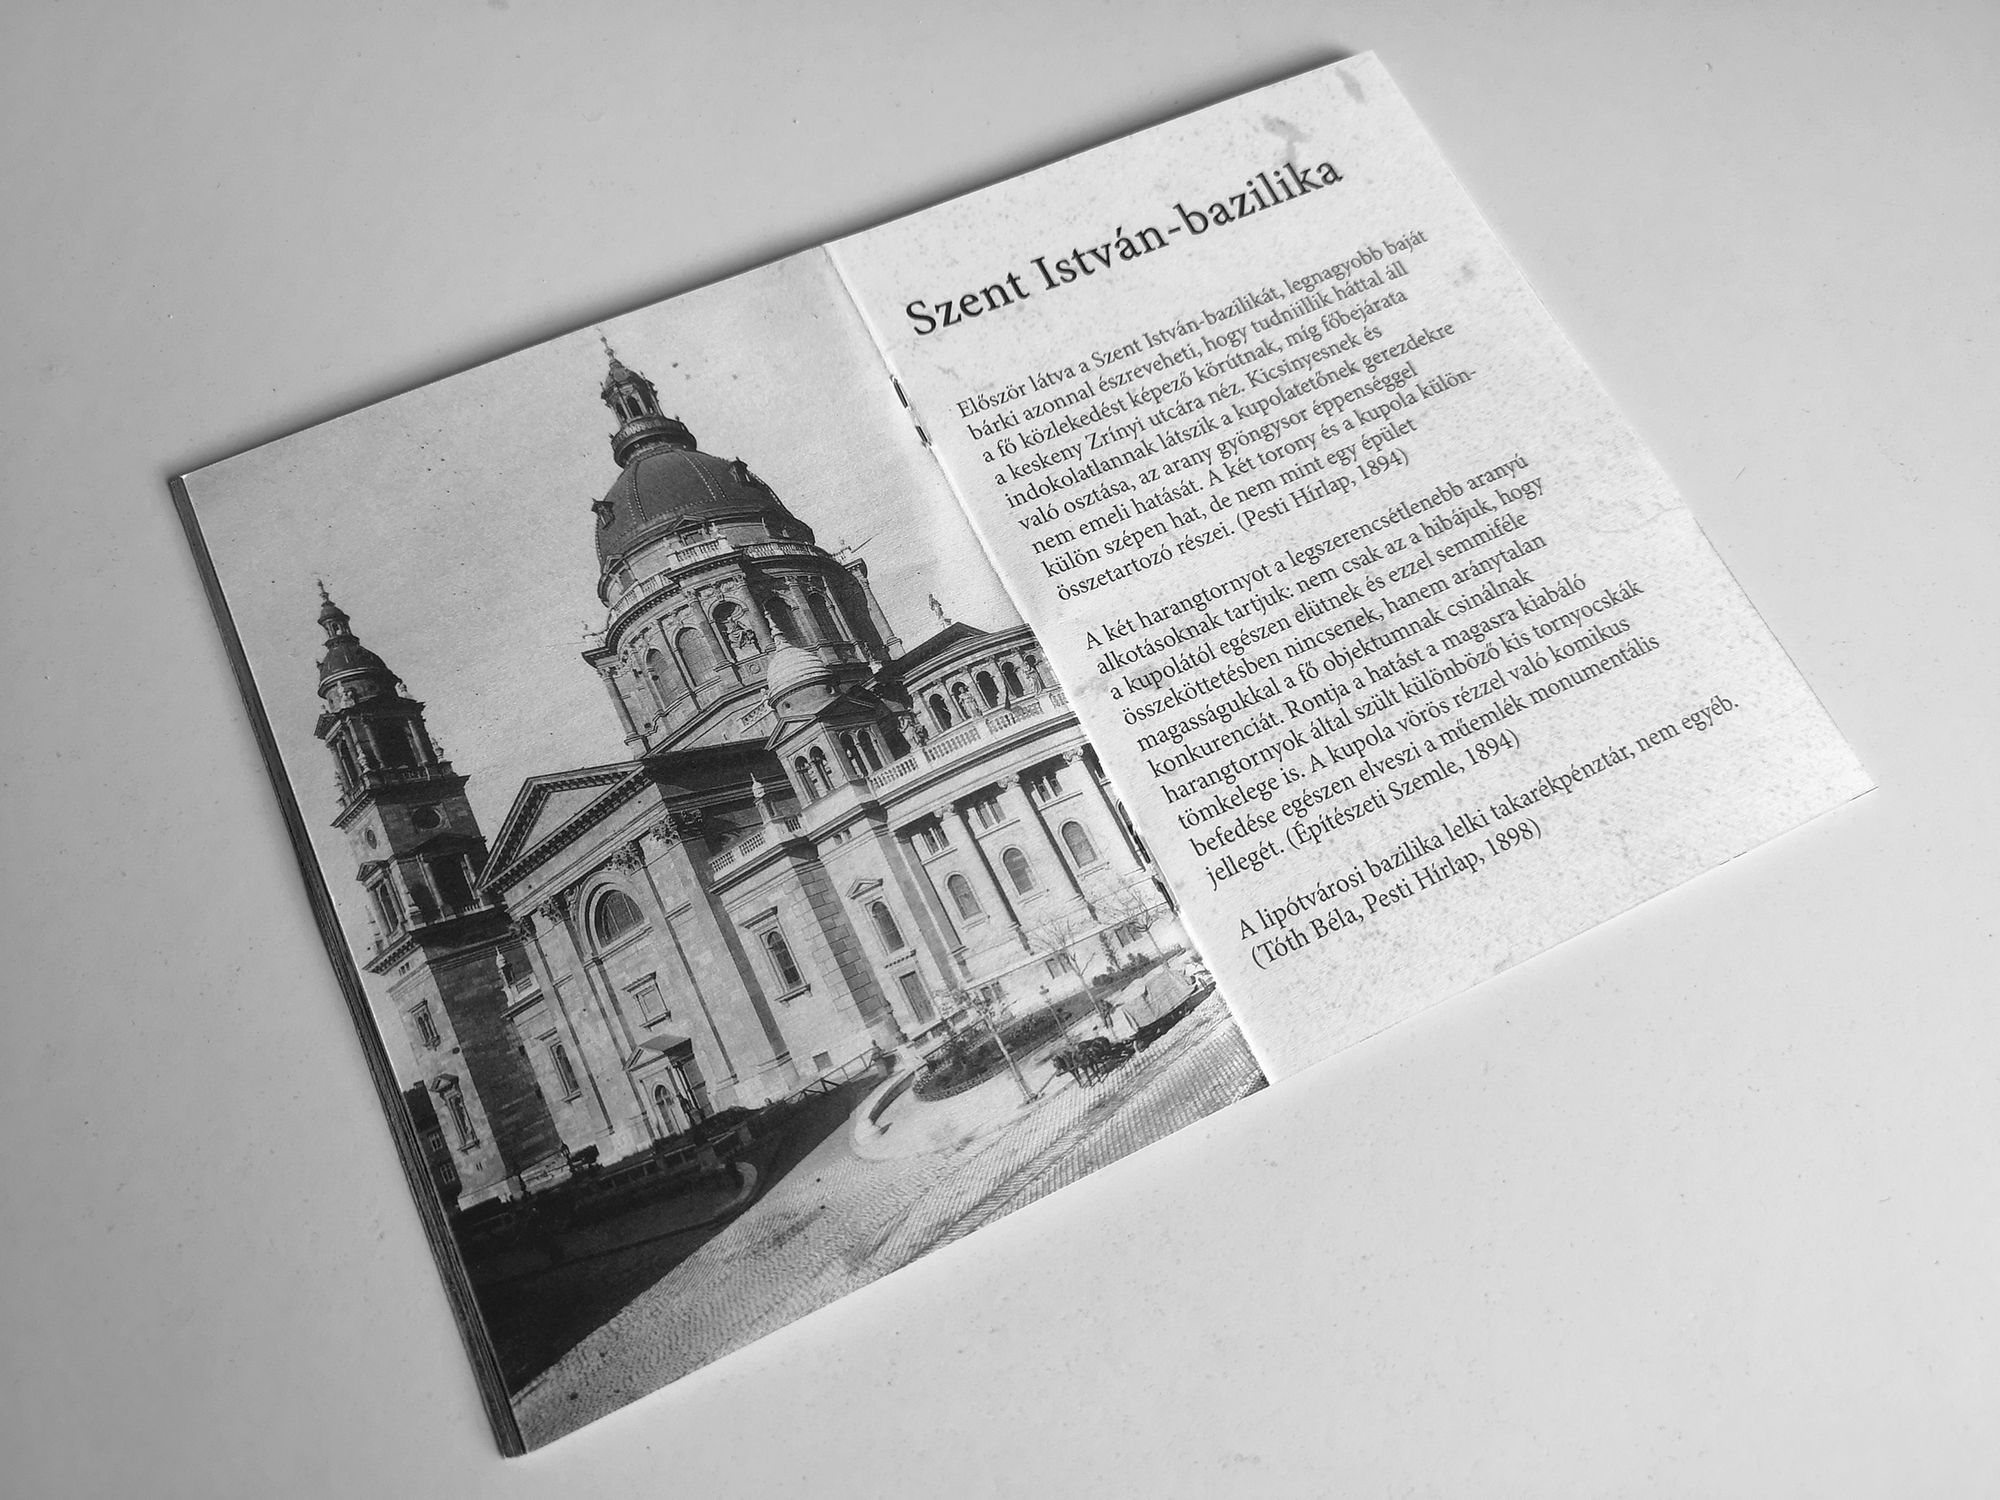 Have you seen it? Here is the Budapest anti-city guide booklet!